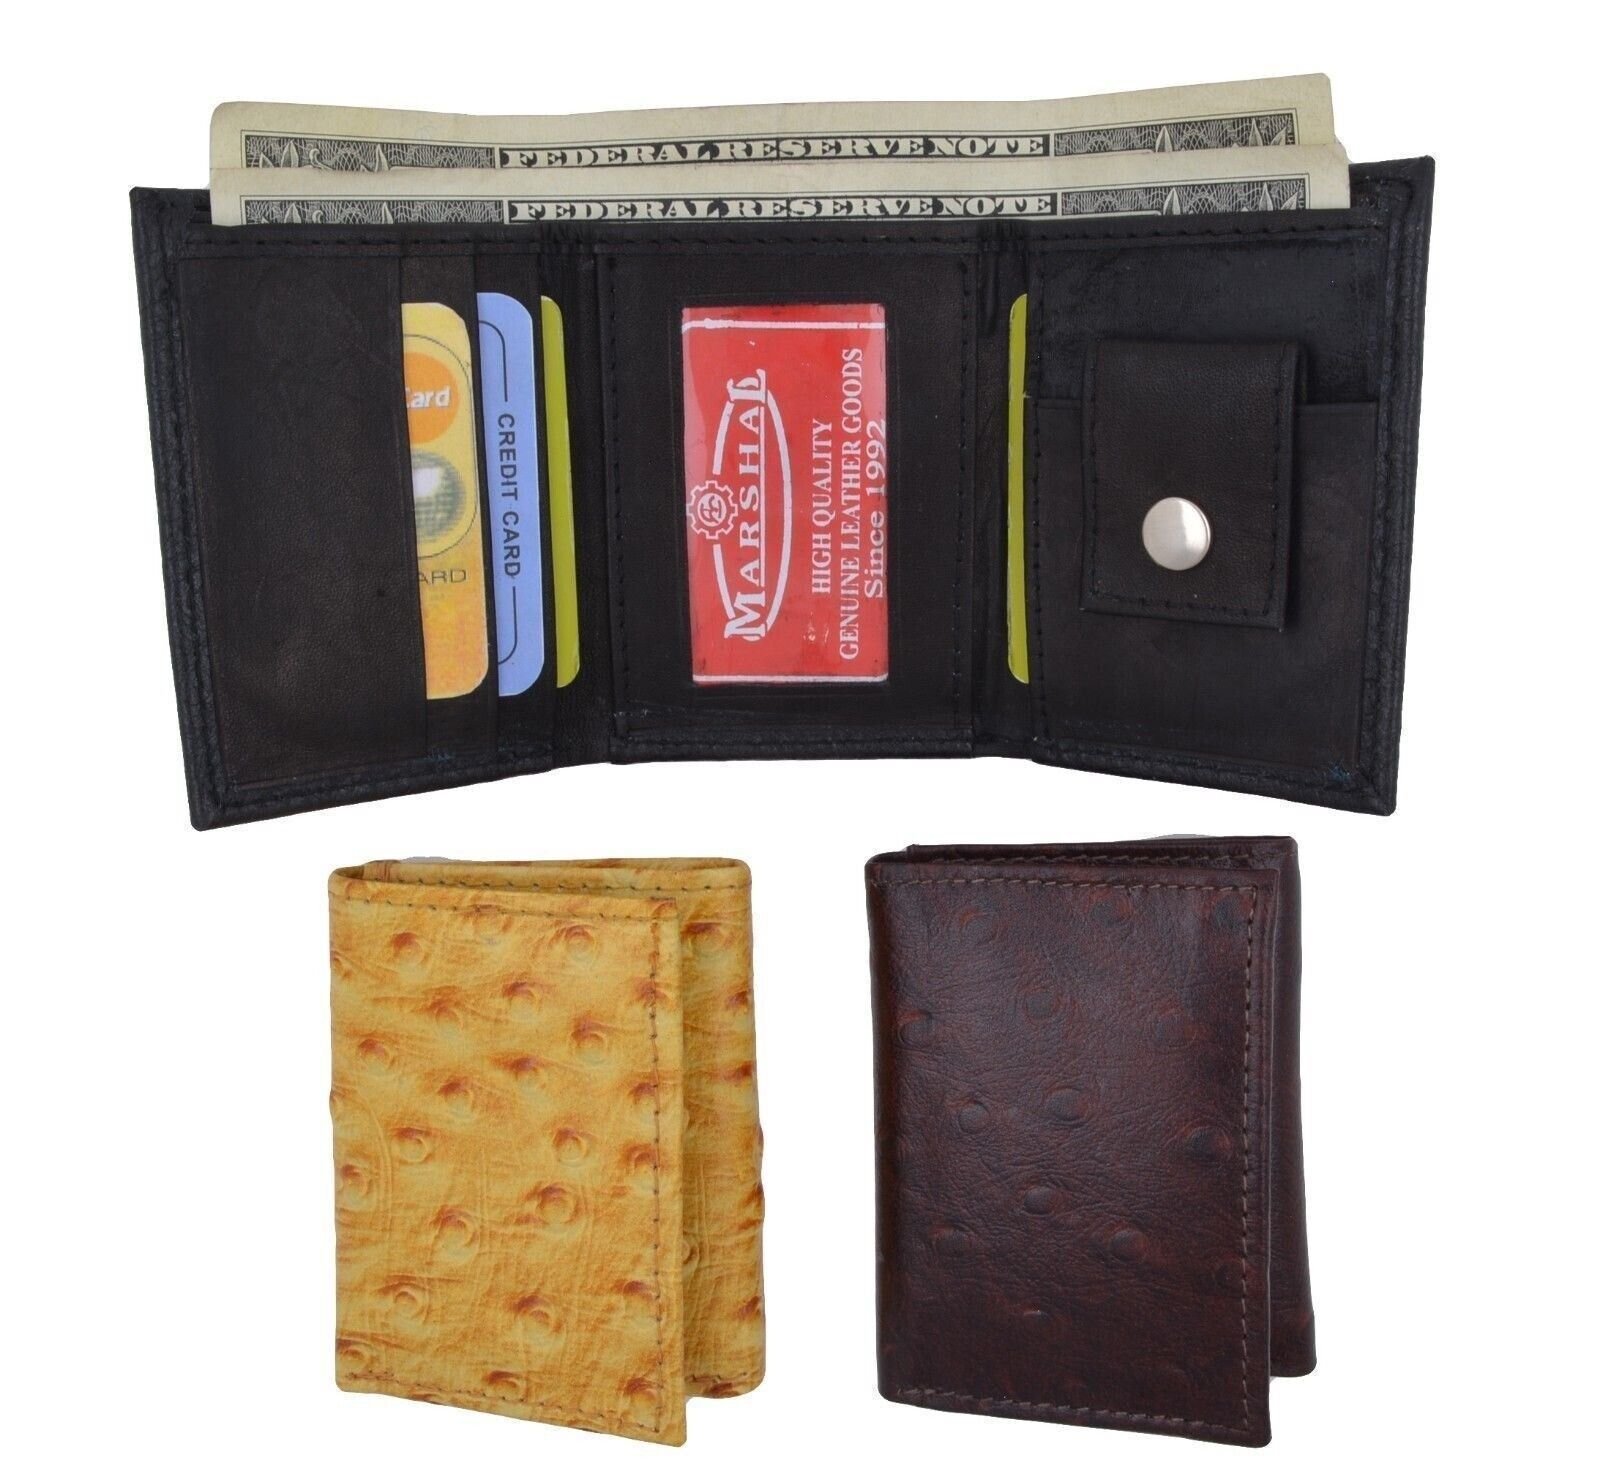 NEW Kids Genuine Leather Ostrich Small Trifold Money Photo Wallet by Marshal